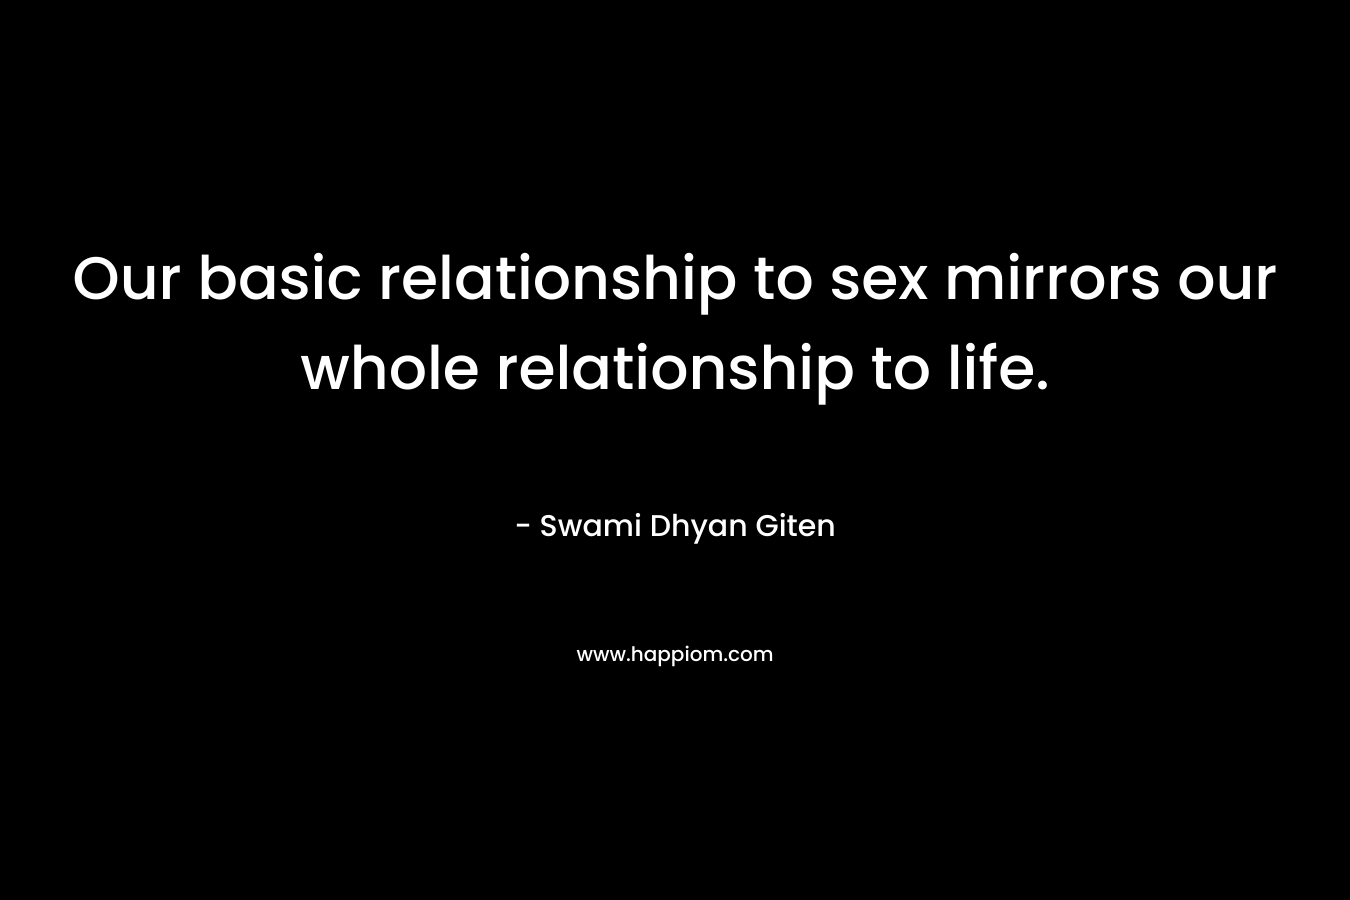 Our basic relationship to sex mirrors our whole relationship to life.